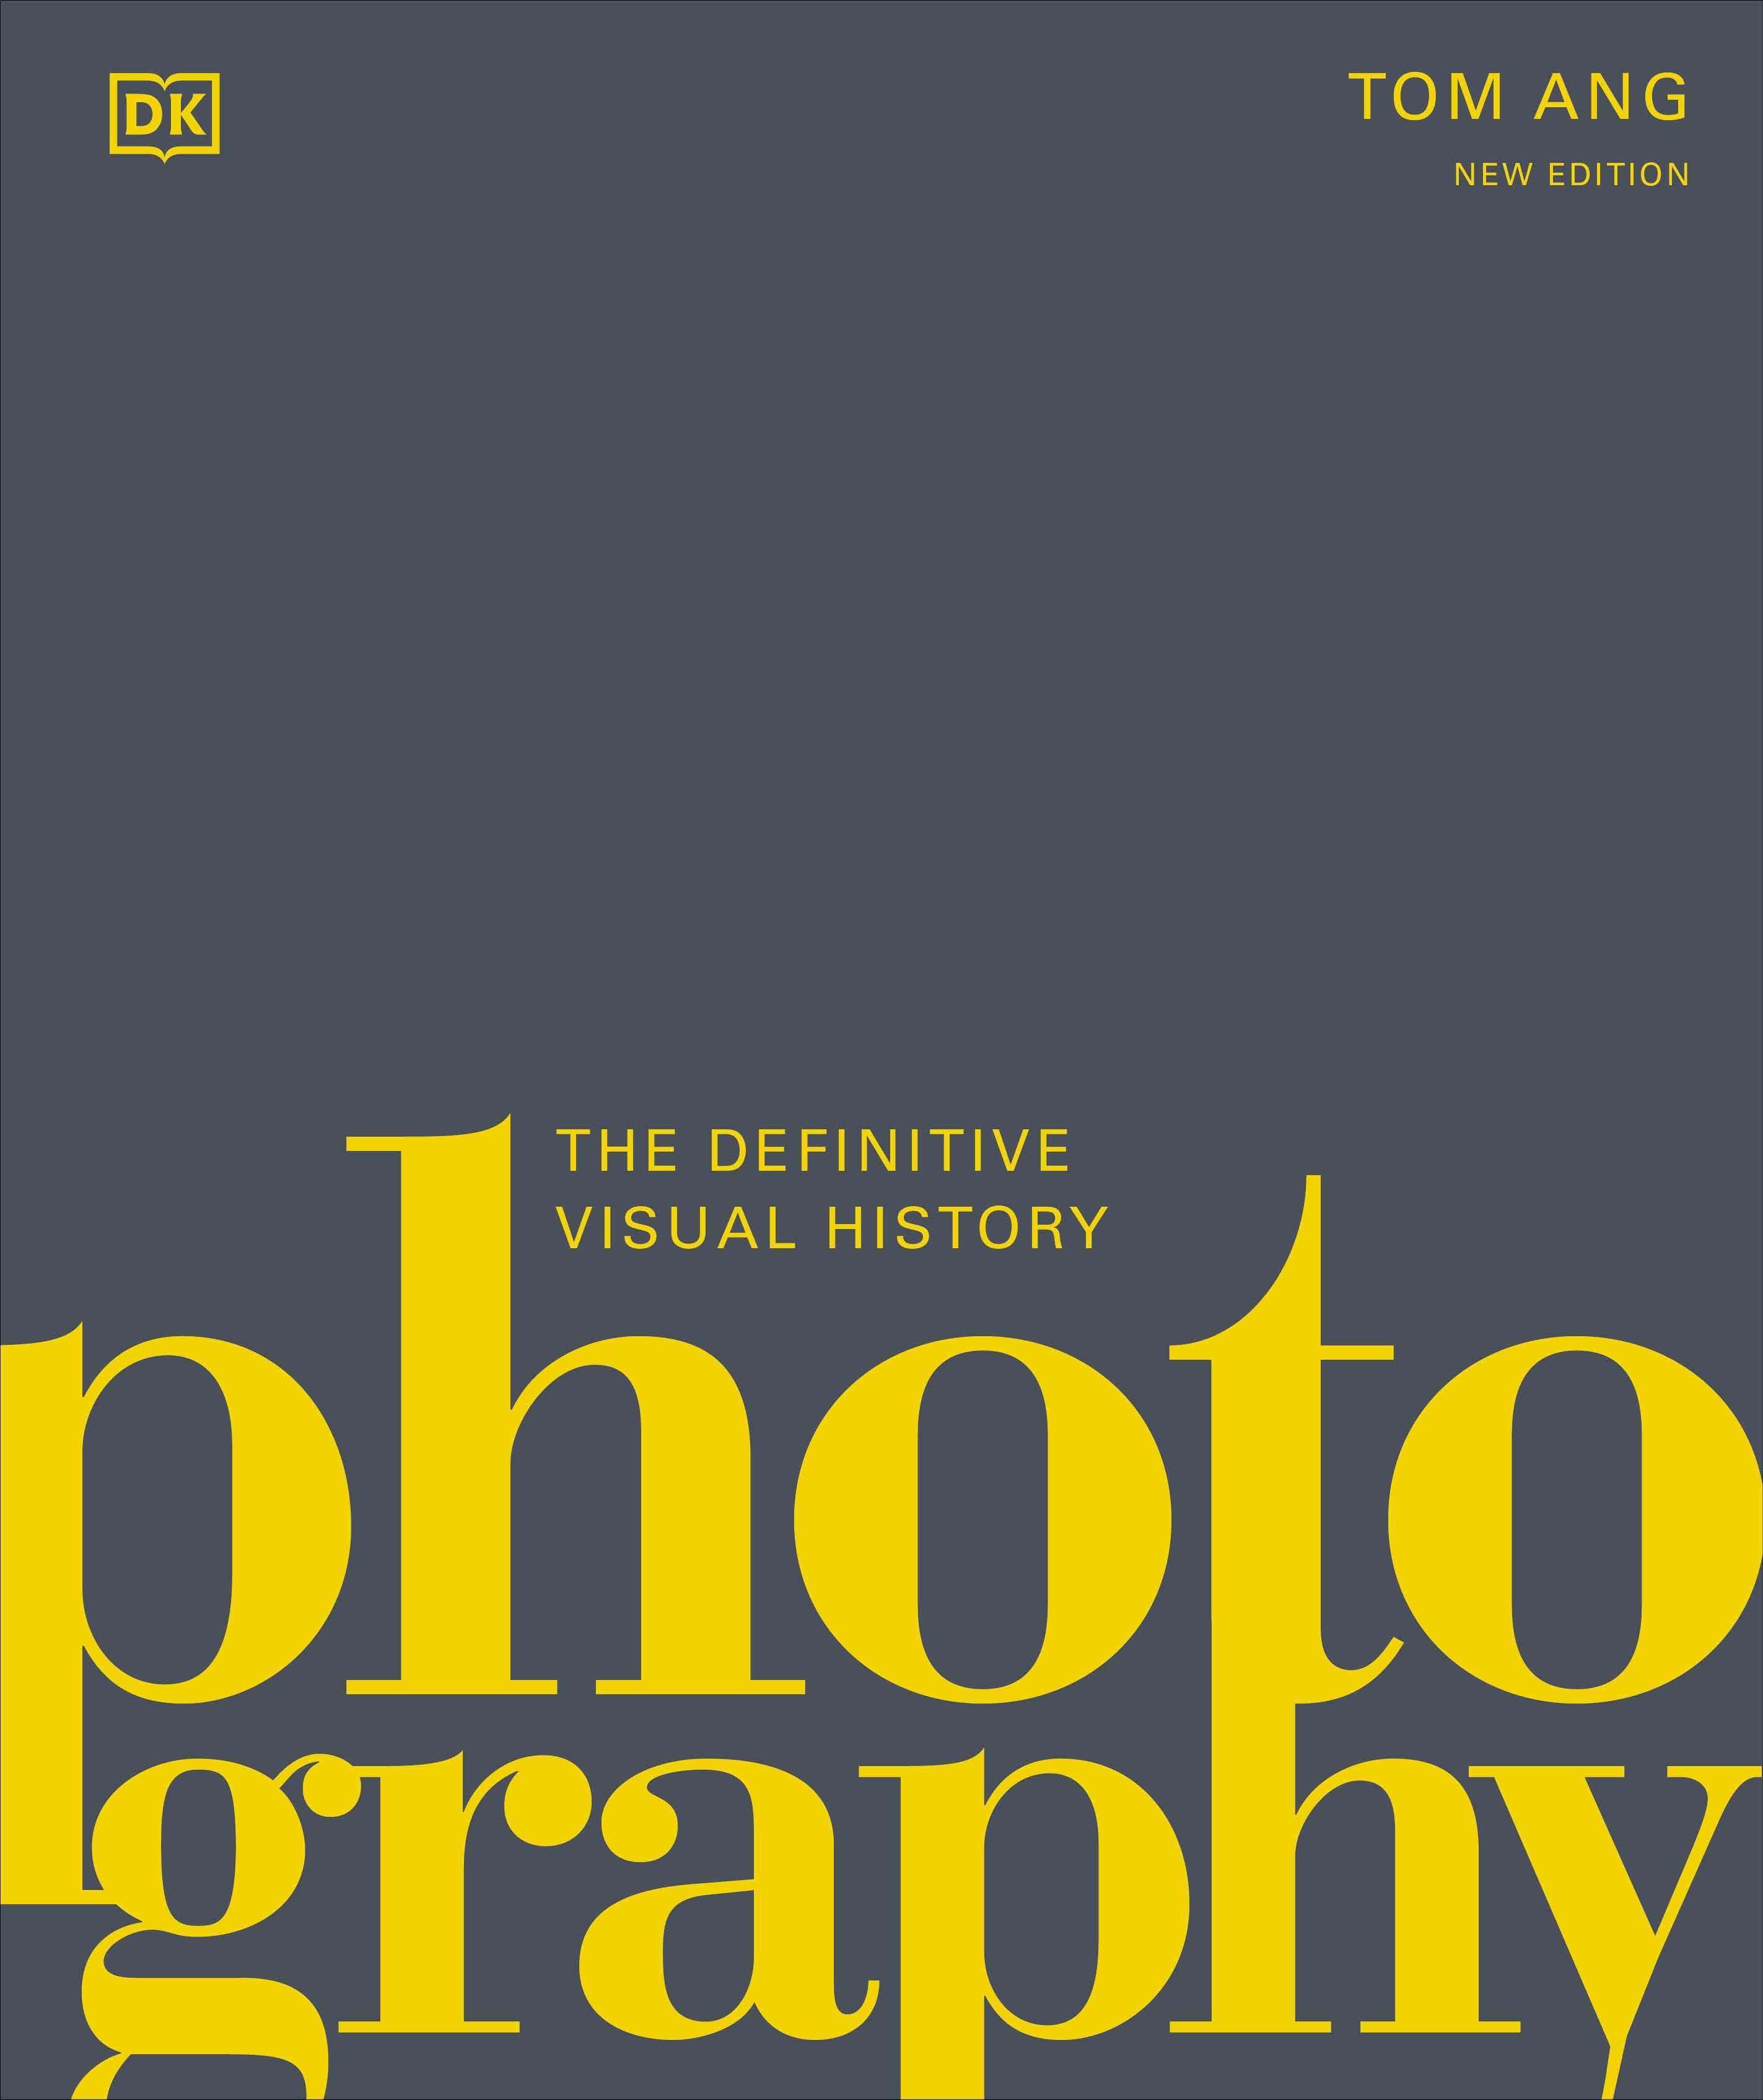 Photography (New Edition)